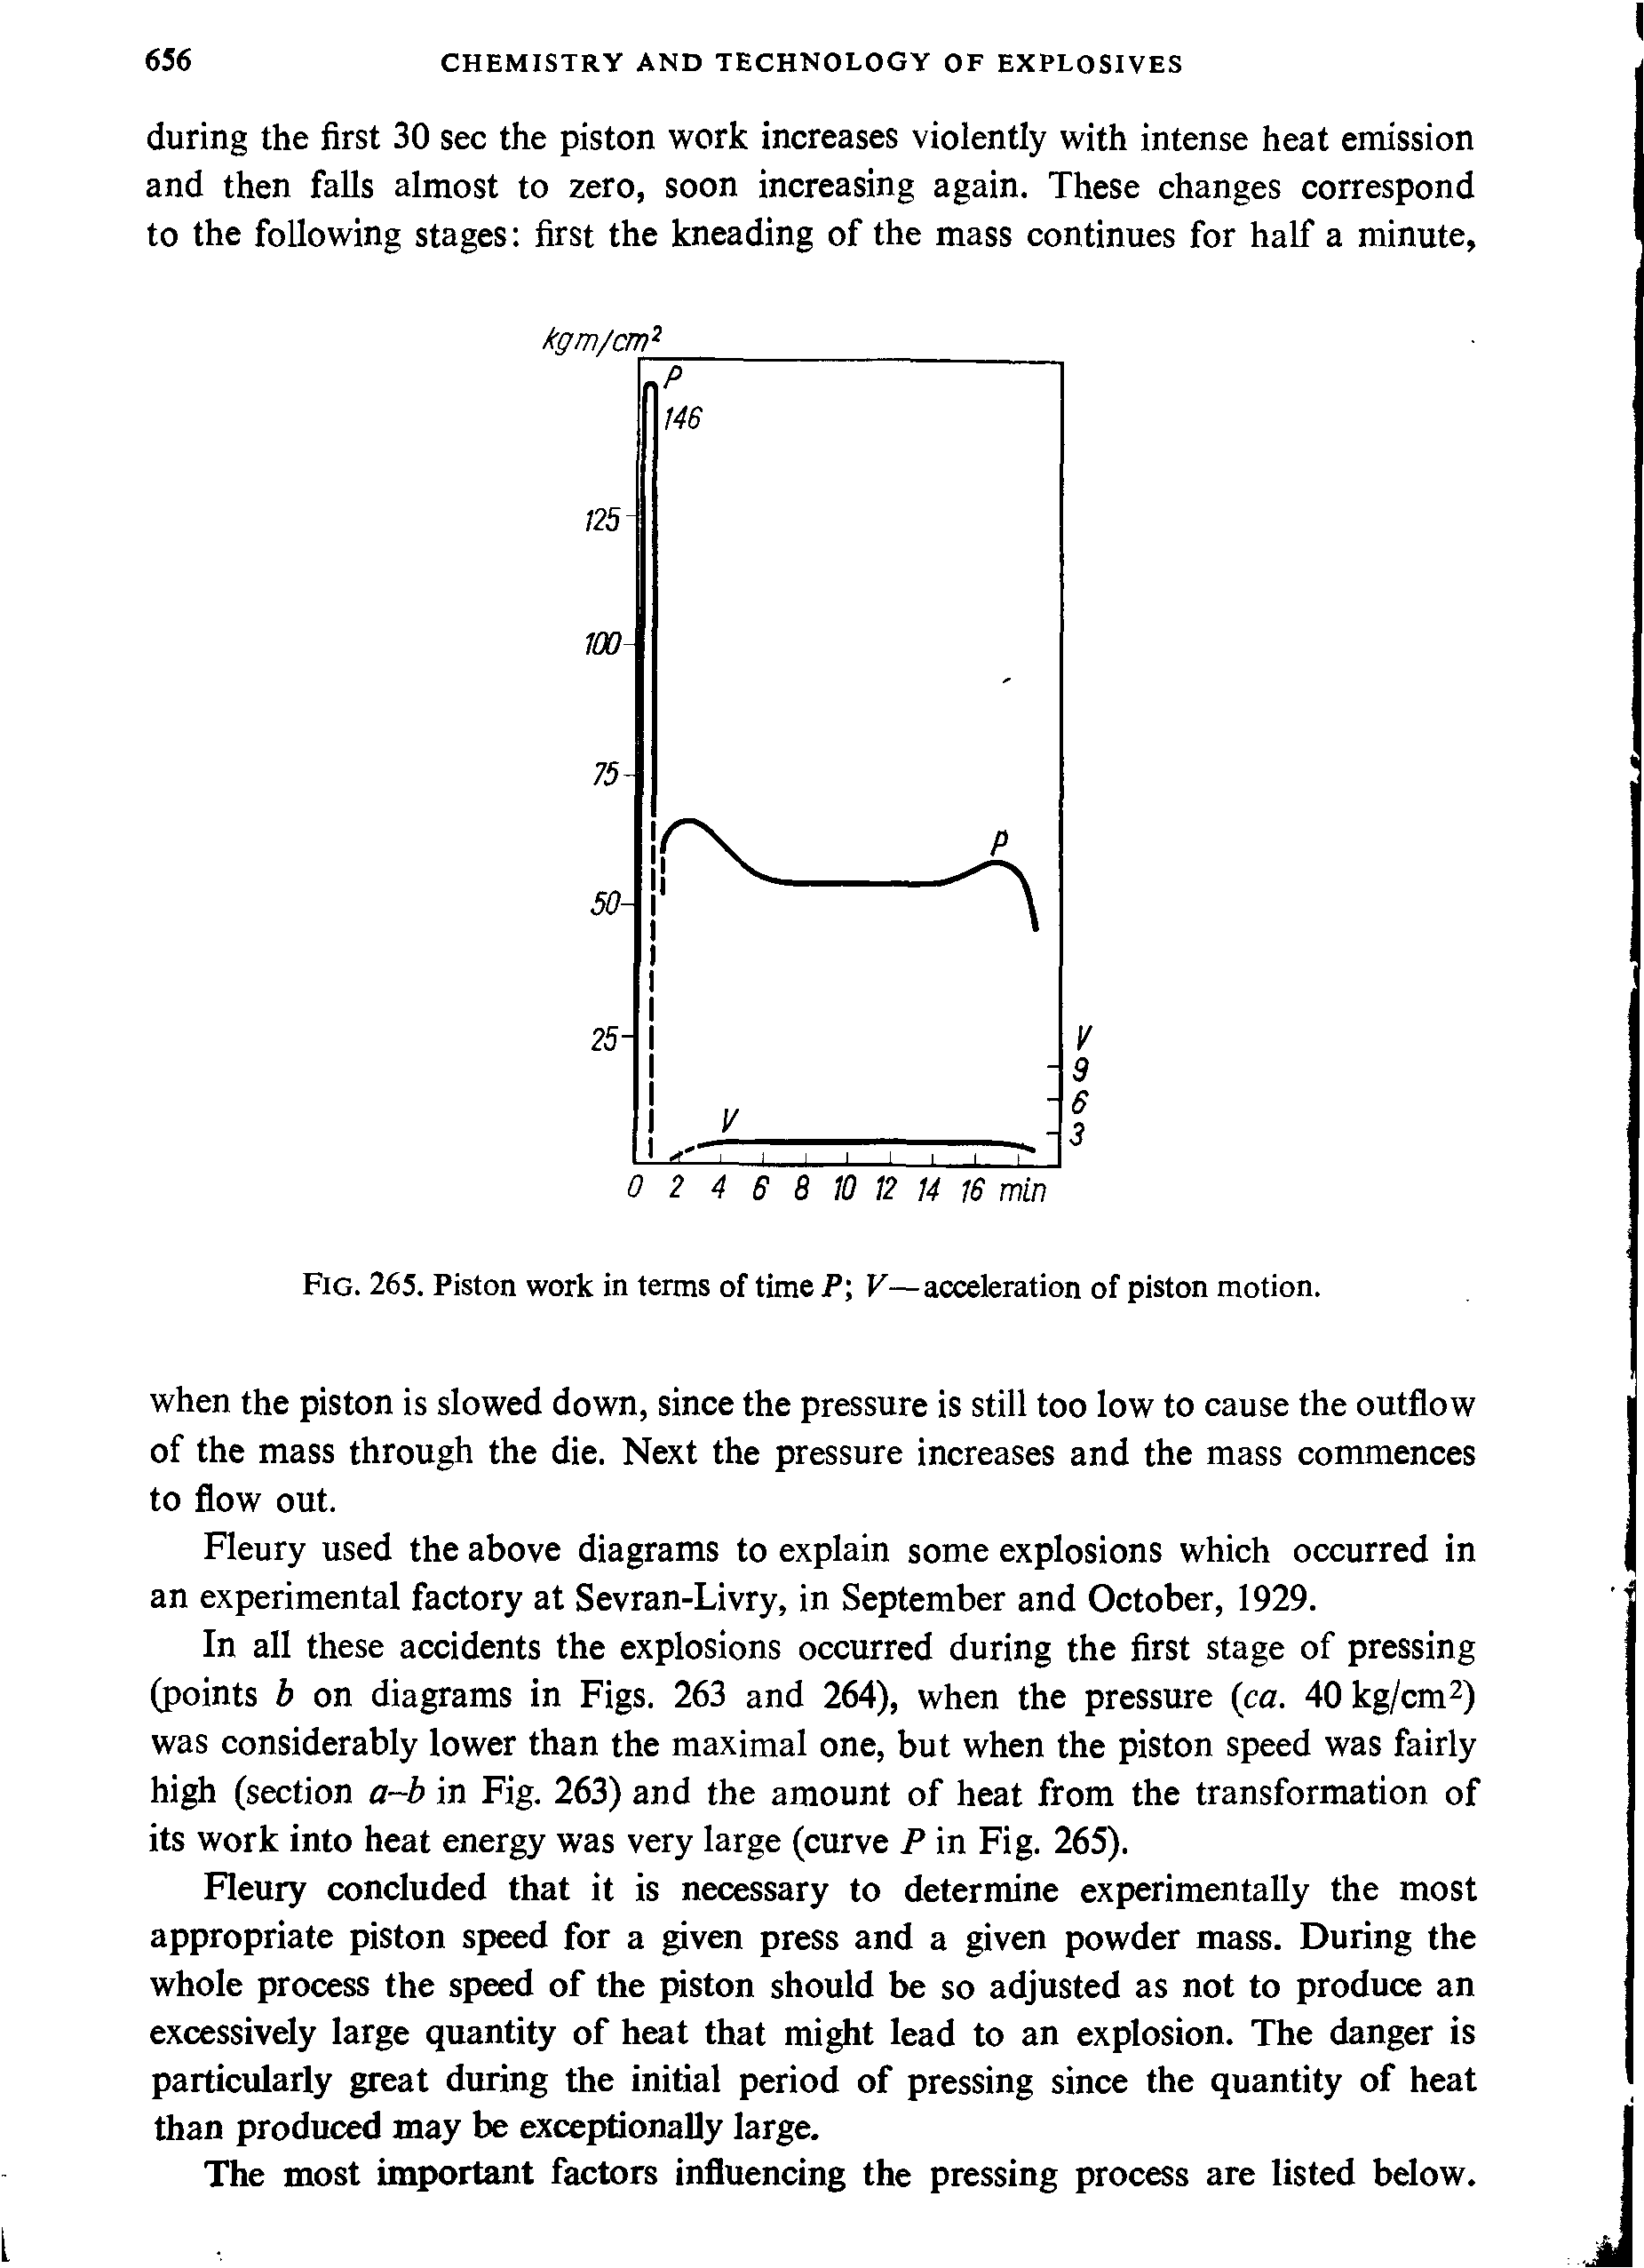 Fig. 265. Piston work in terms of time P V—acceleration of piston motion.